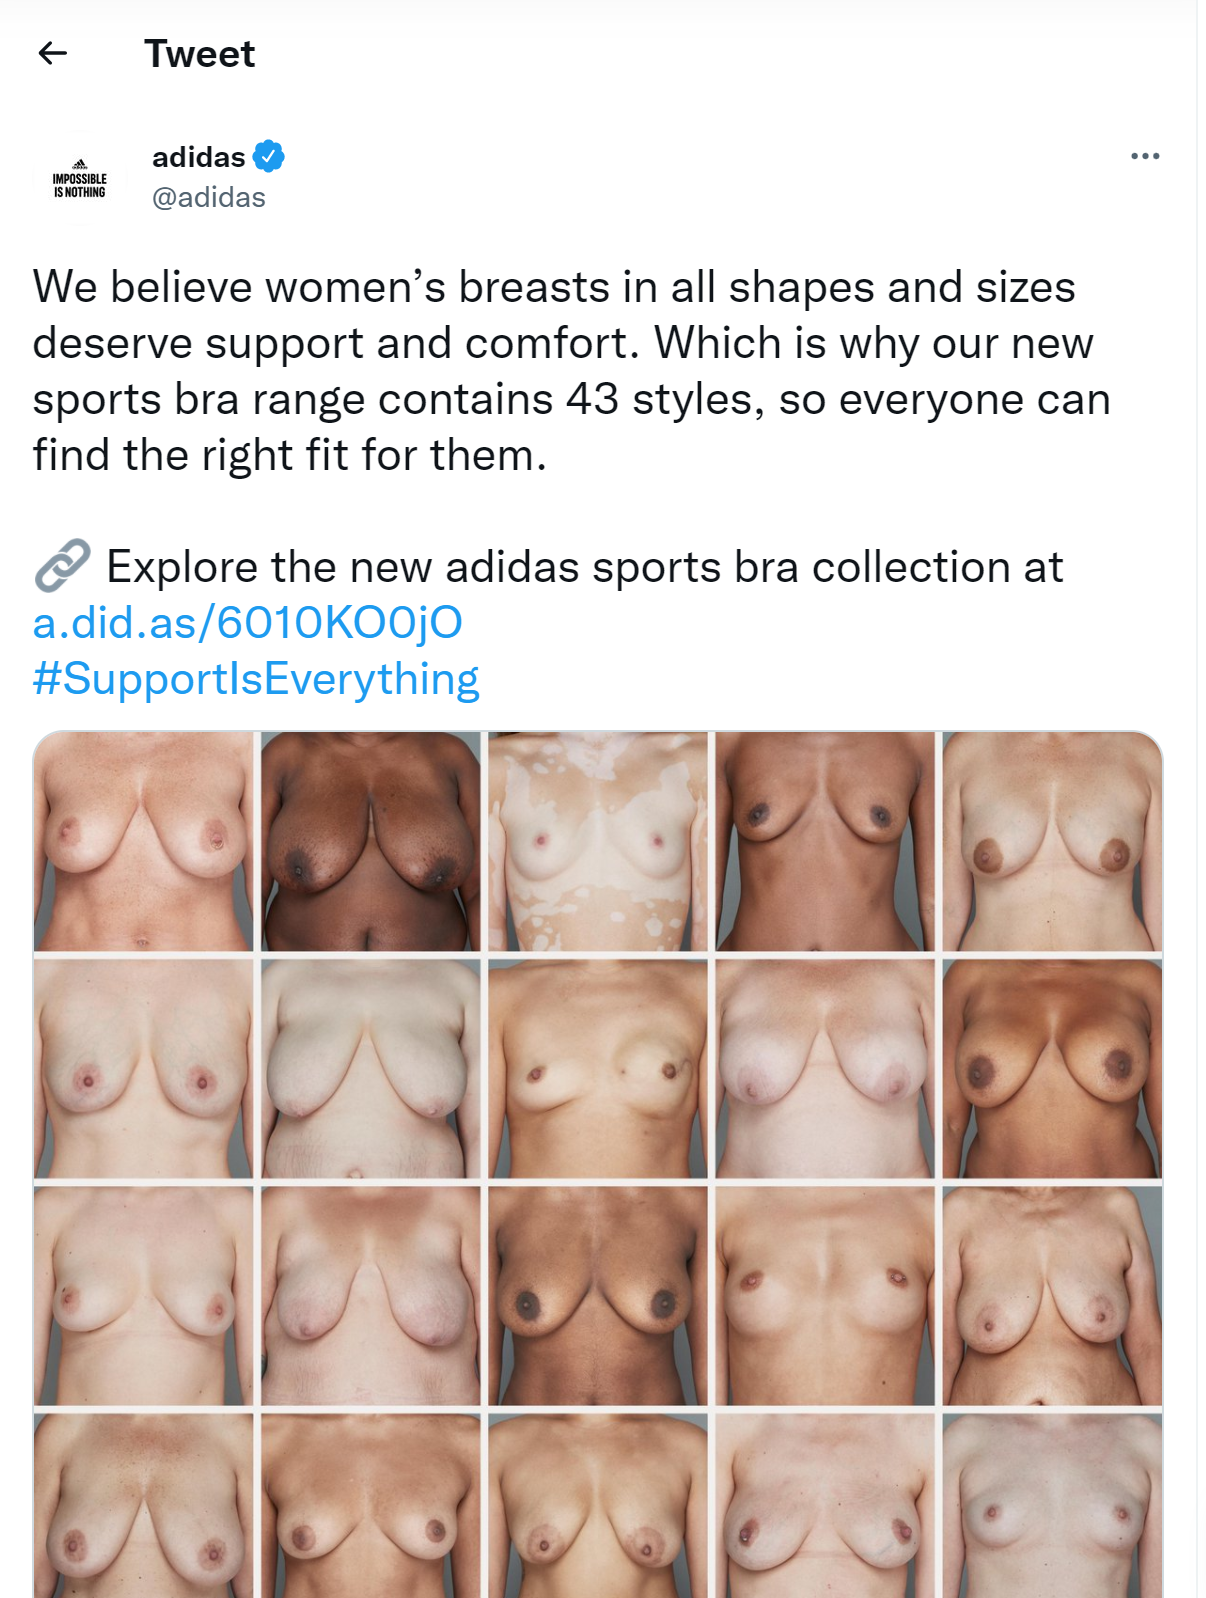 The Adidas Twitter post banned by the ASA